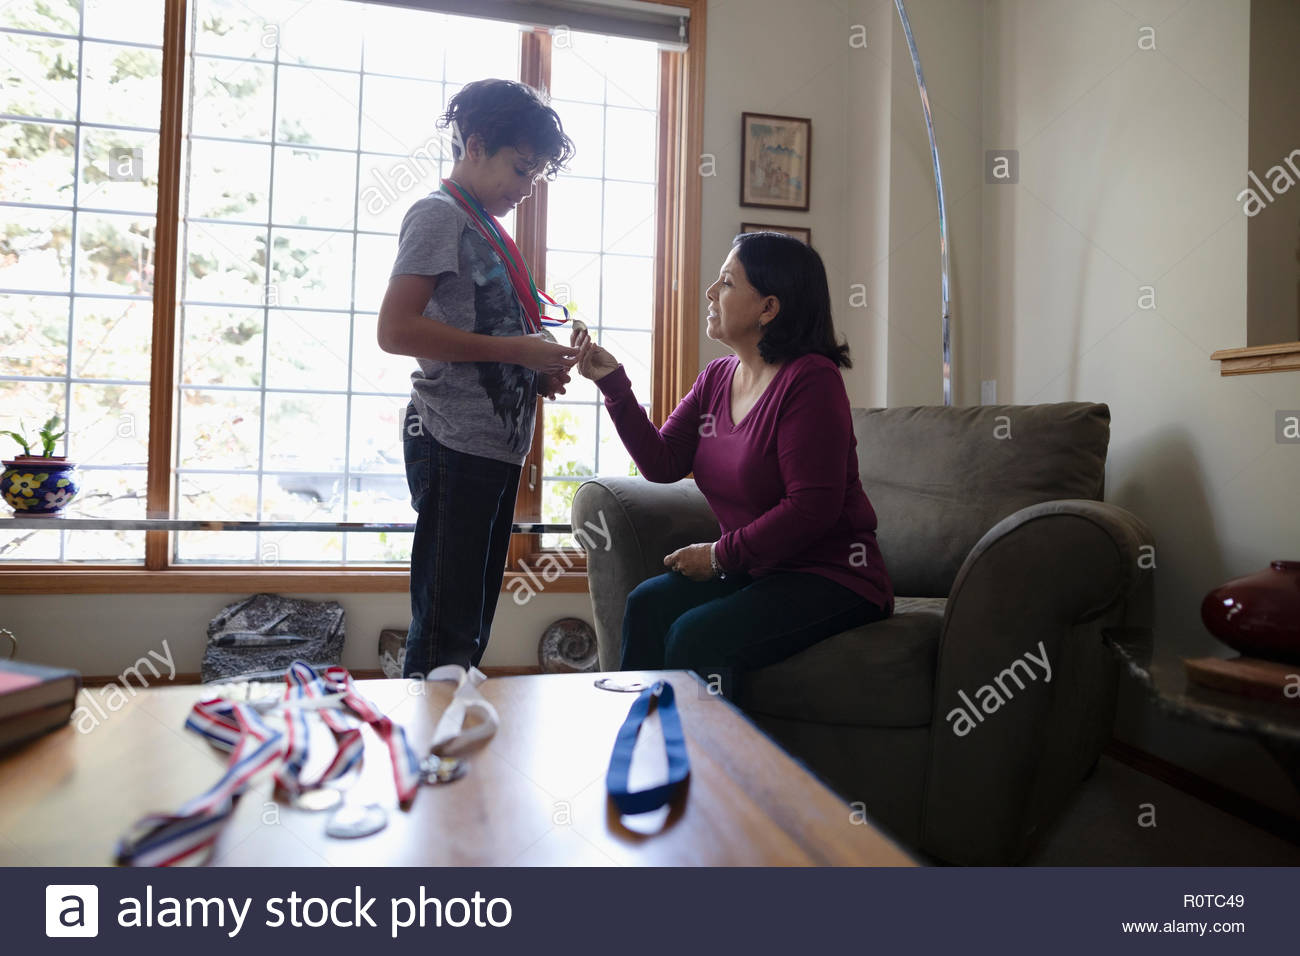 Latinx grandson showing sports medals to grandmother Stock Photo